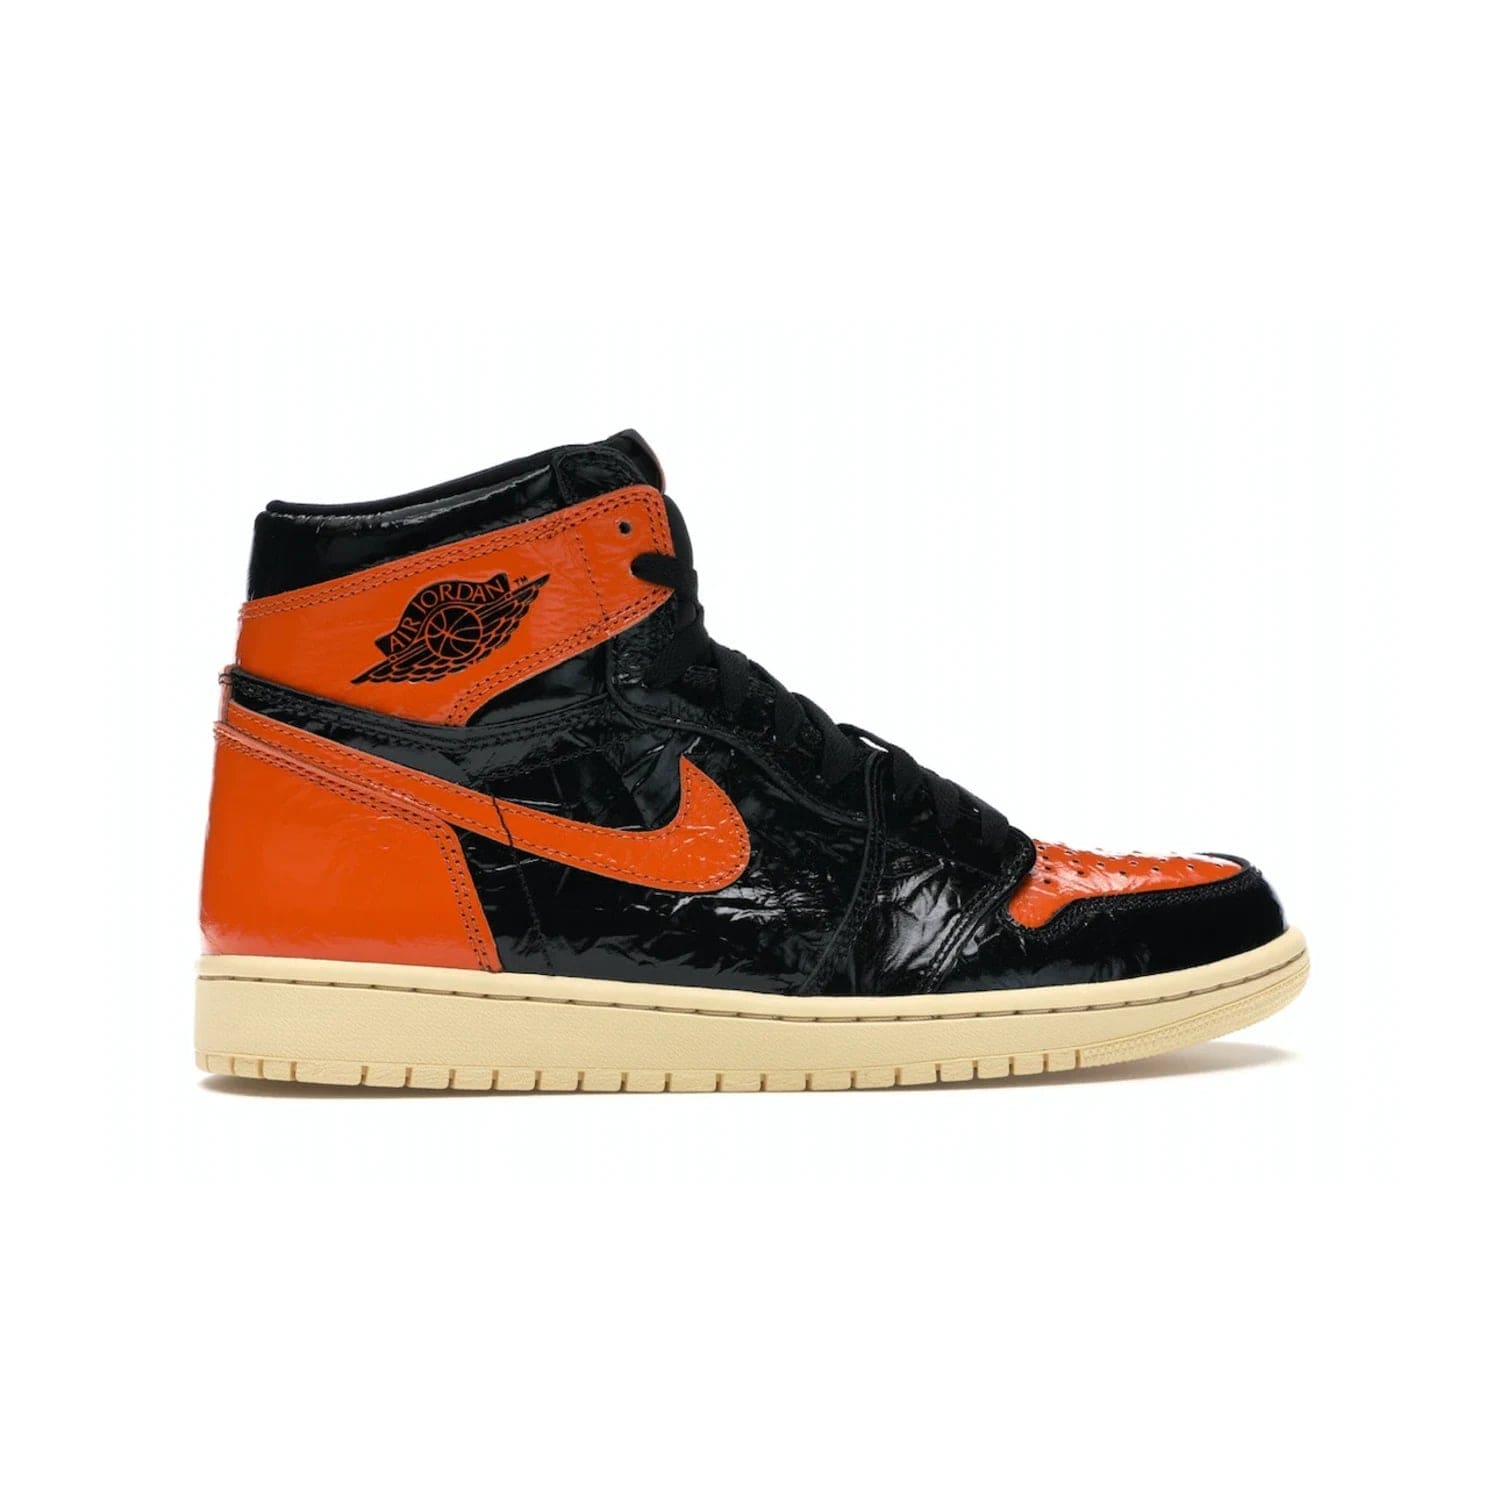 Jordan 1 Retro High Shattered Backboard 3.0 - Image 36 - Only at www.BallersClubKickz.com - #
Jordan 1 Retro High Shattered Backboard 3.0: the perfect blend of modern style and nostalgic flair featuring an orange and black crinkled patent leather upper and yellowed vanilla outsole. Get these exclusive sneakers released in October of 2019!